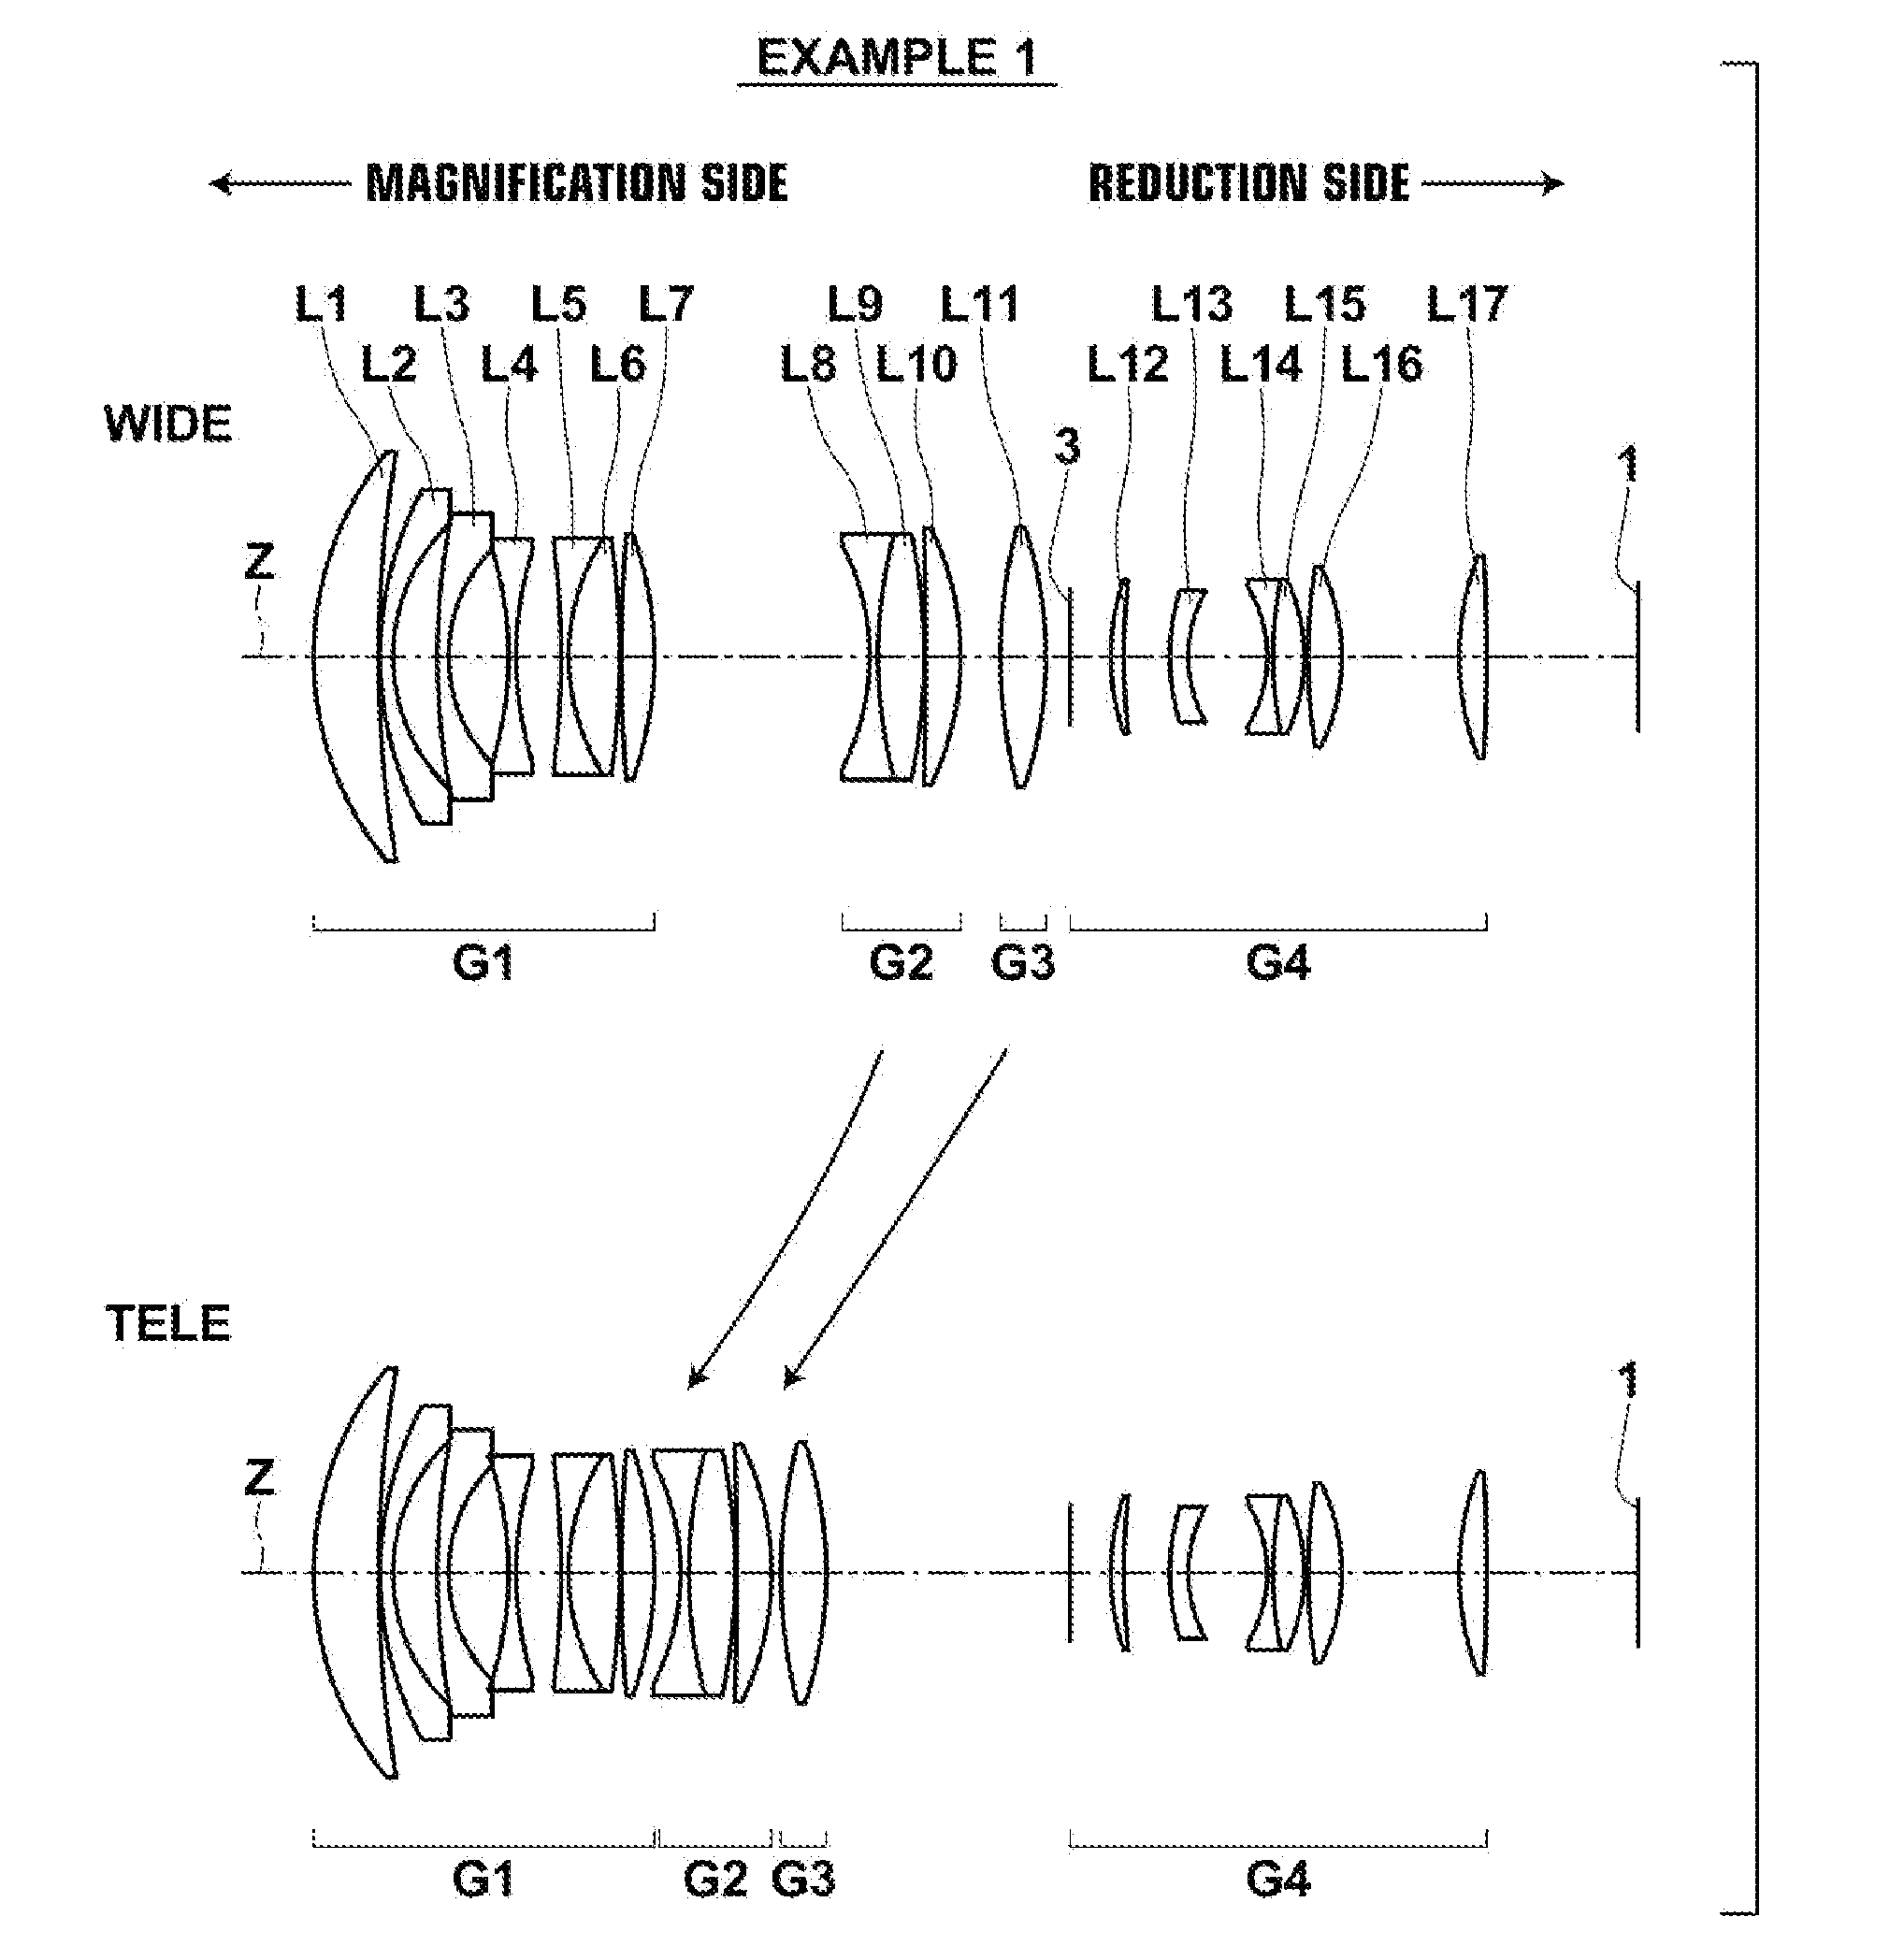 Optical system for projection and projection-type display apparatus